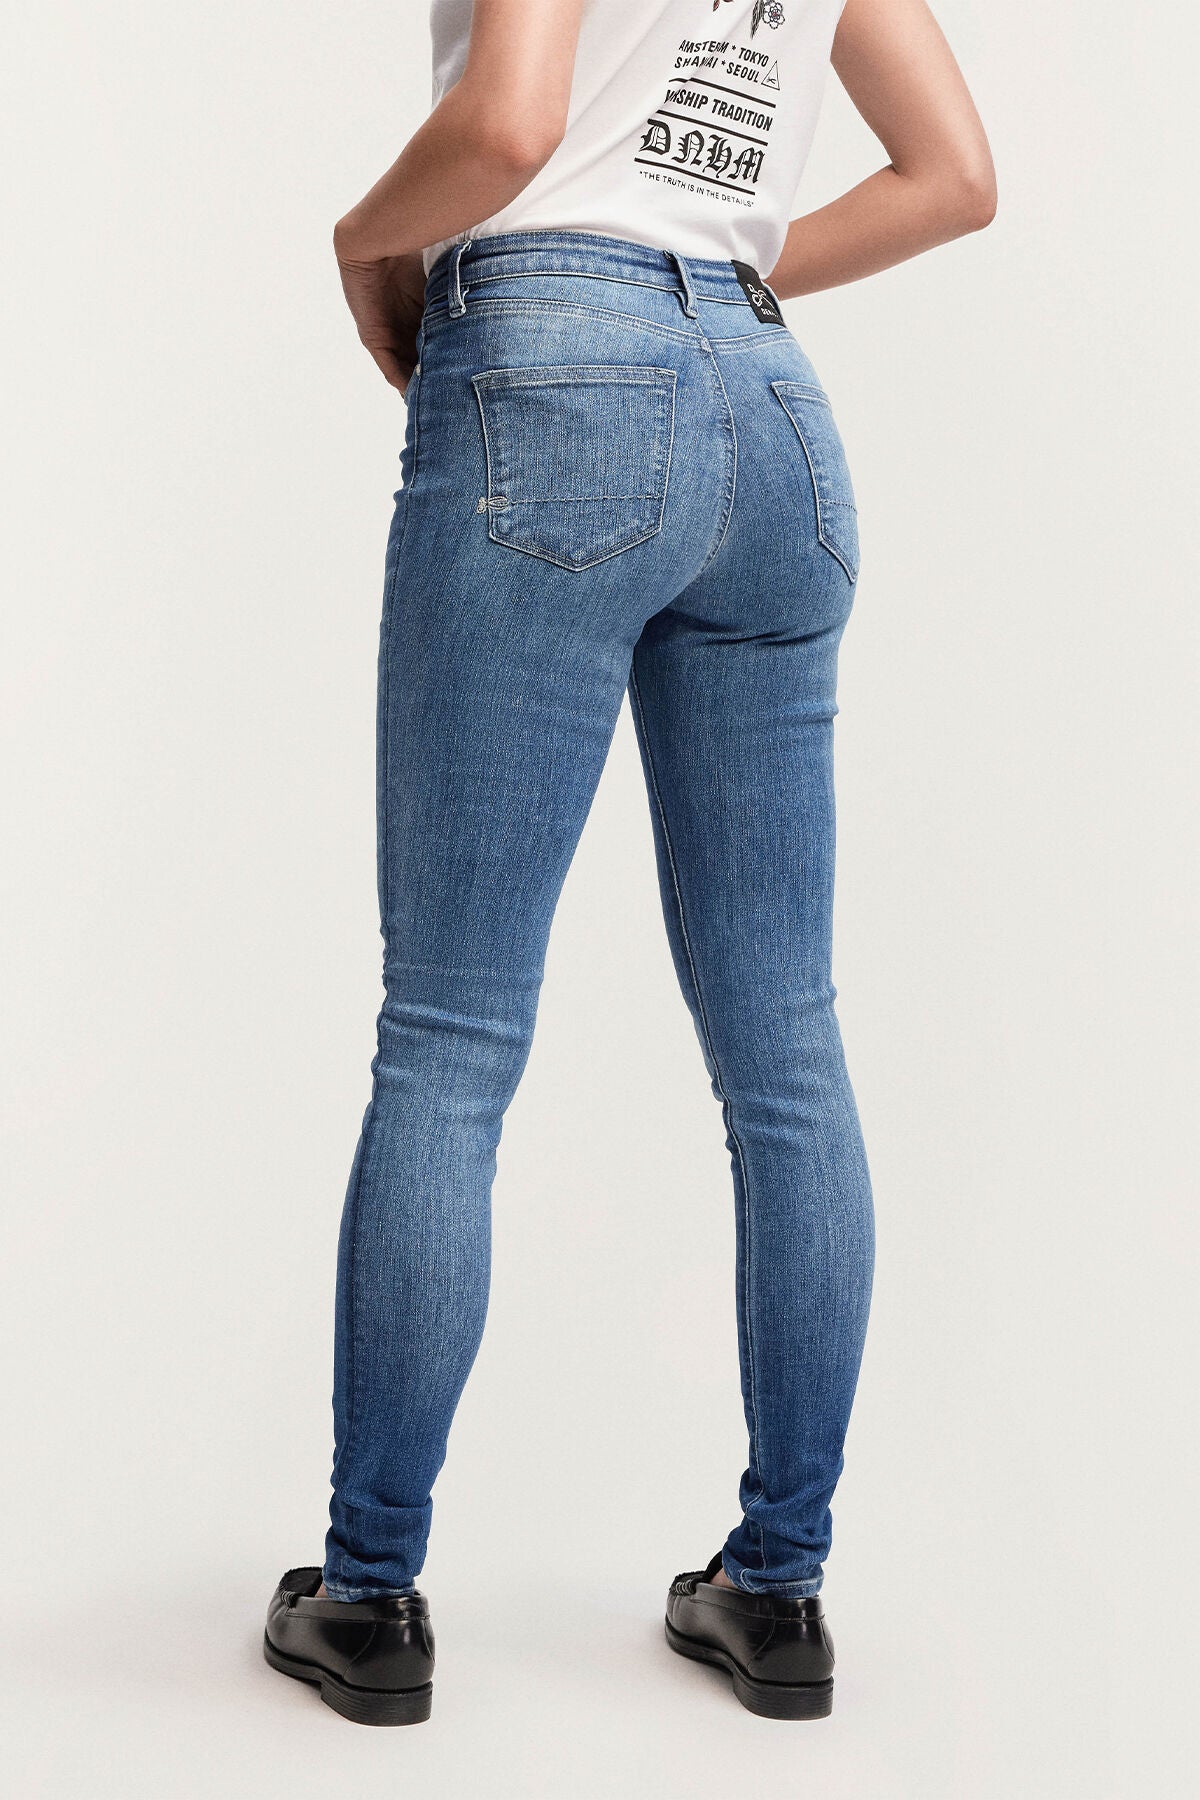 The back view of a woman wearing Denham high-rise skinny denim jeans in NEEDLE Skinny - Light Indigo and a white t-shirt.